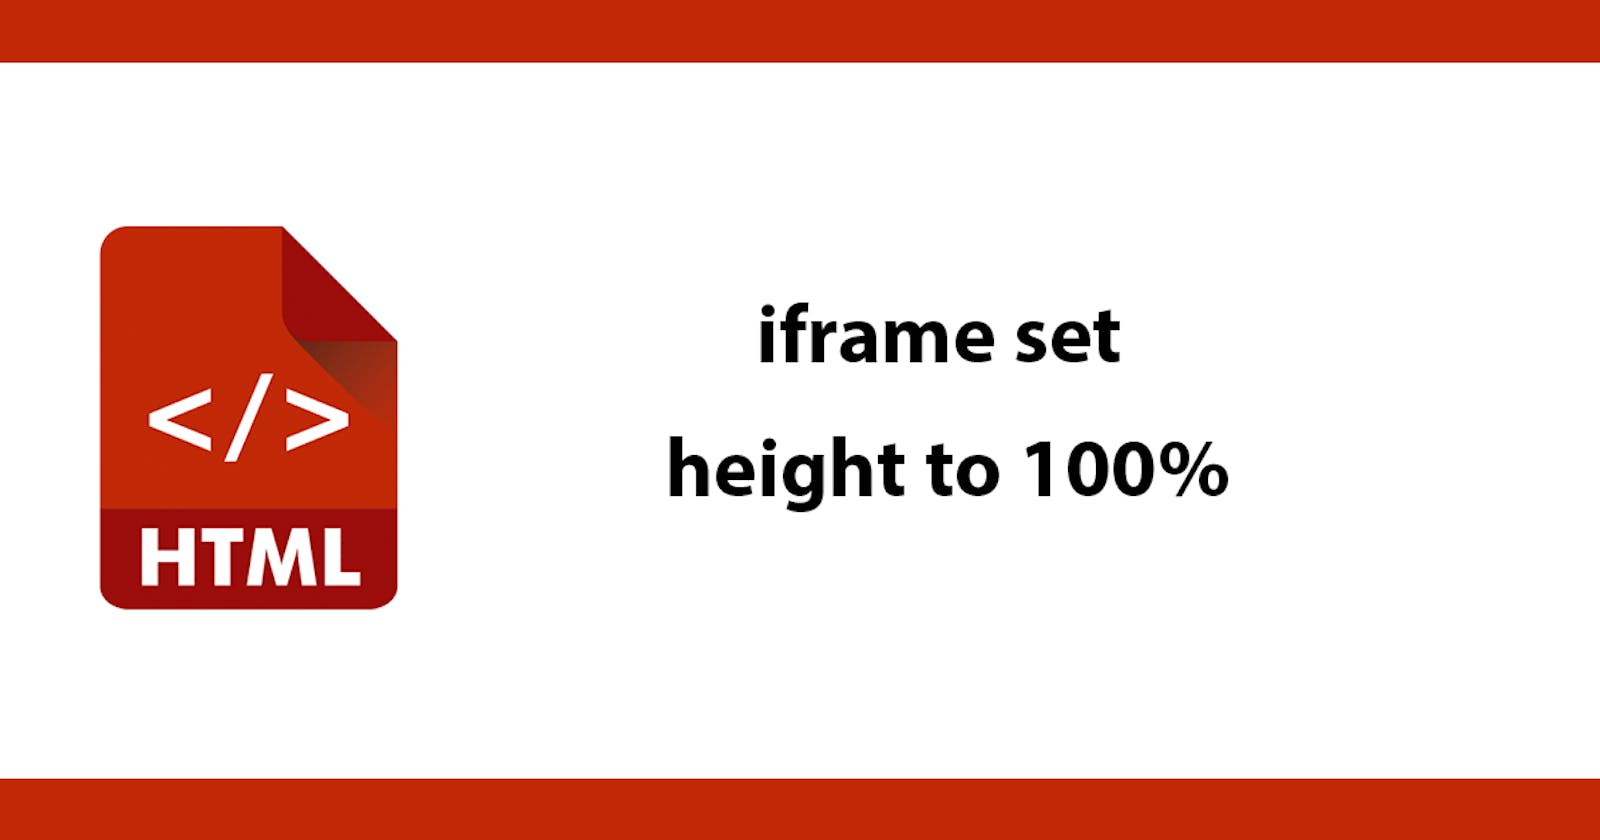 iframe set height to 100%